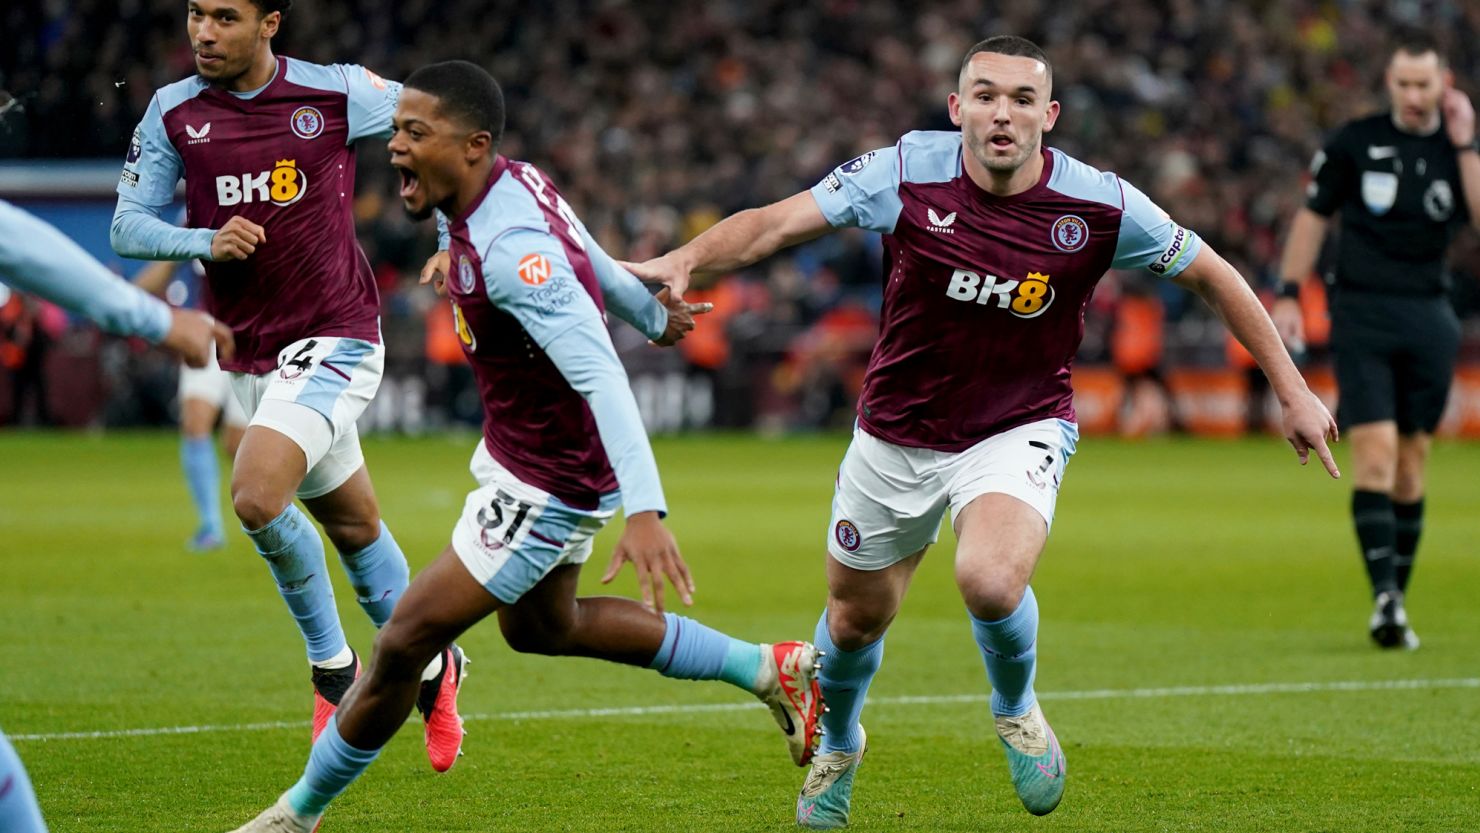 Aston Villa confirms status as unlikely Premier League title contender, defeating Arsenal and Manchester City in same week | CNN